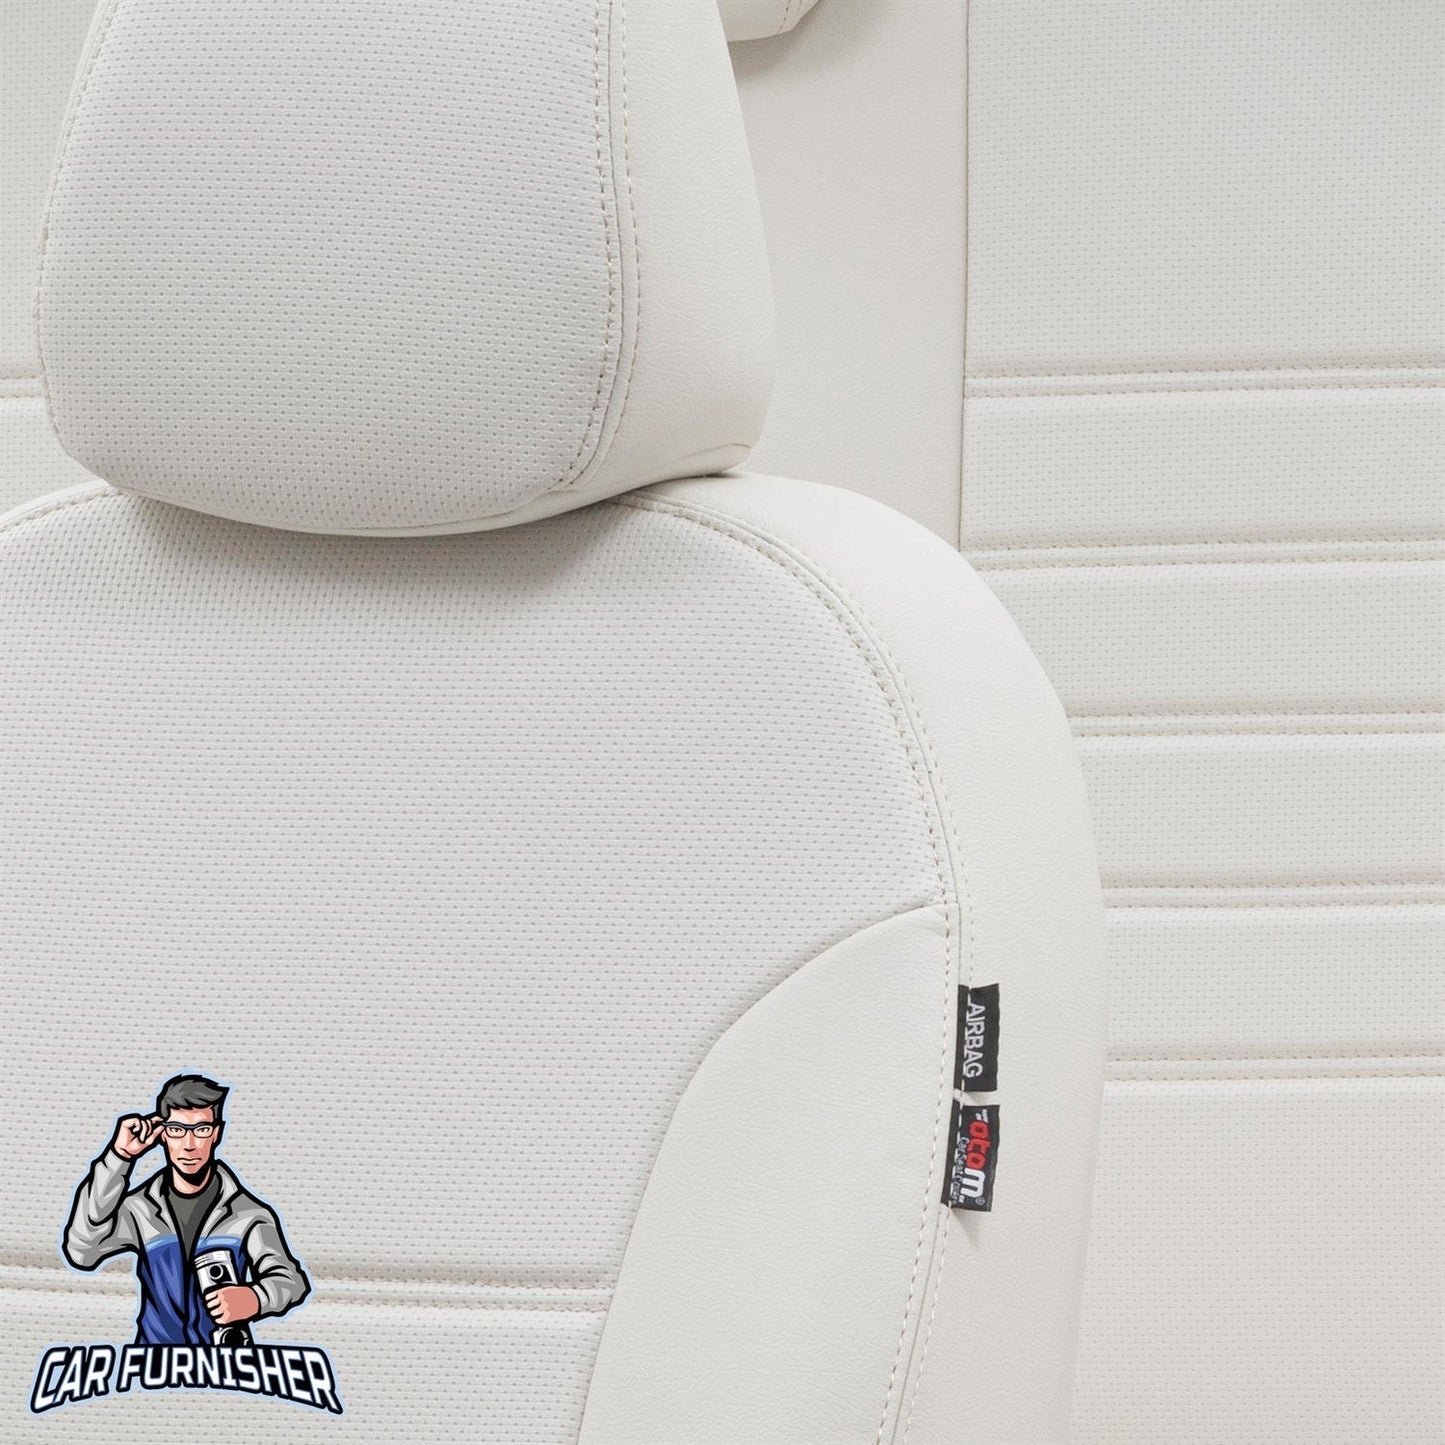 Dacia Logan Seat Covers New York Leather Design Ivory Leather